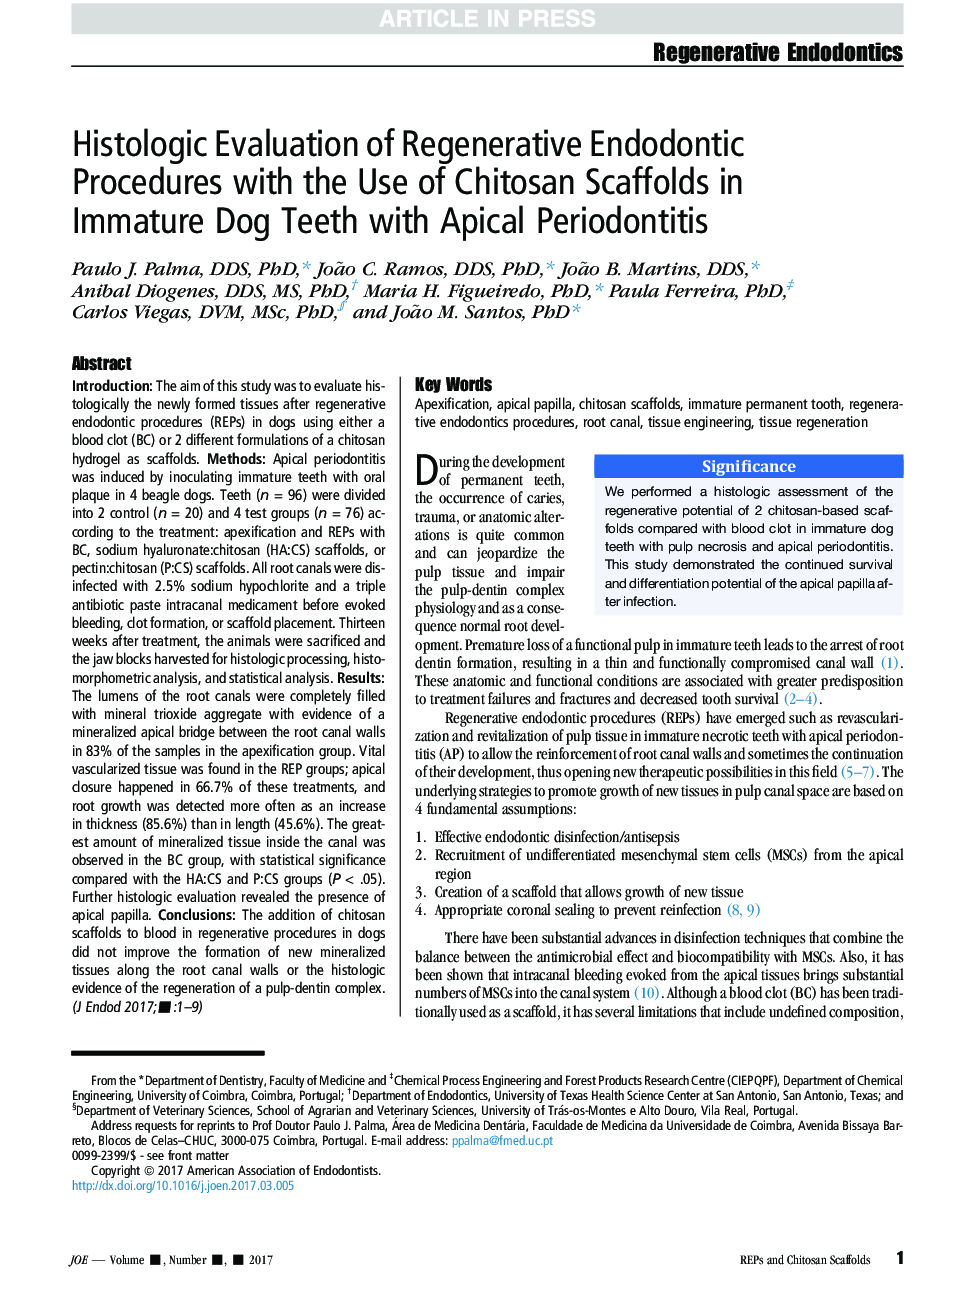 Histologic Evaluation of Regenerative Endodontic Procedures with the Use of Chitosan Scaffolds in Immature Dog Teeth with Apical Periodontitis